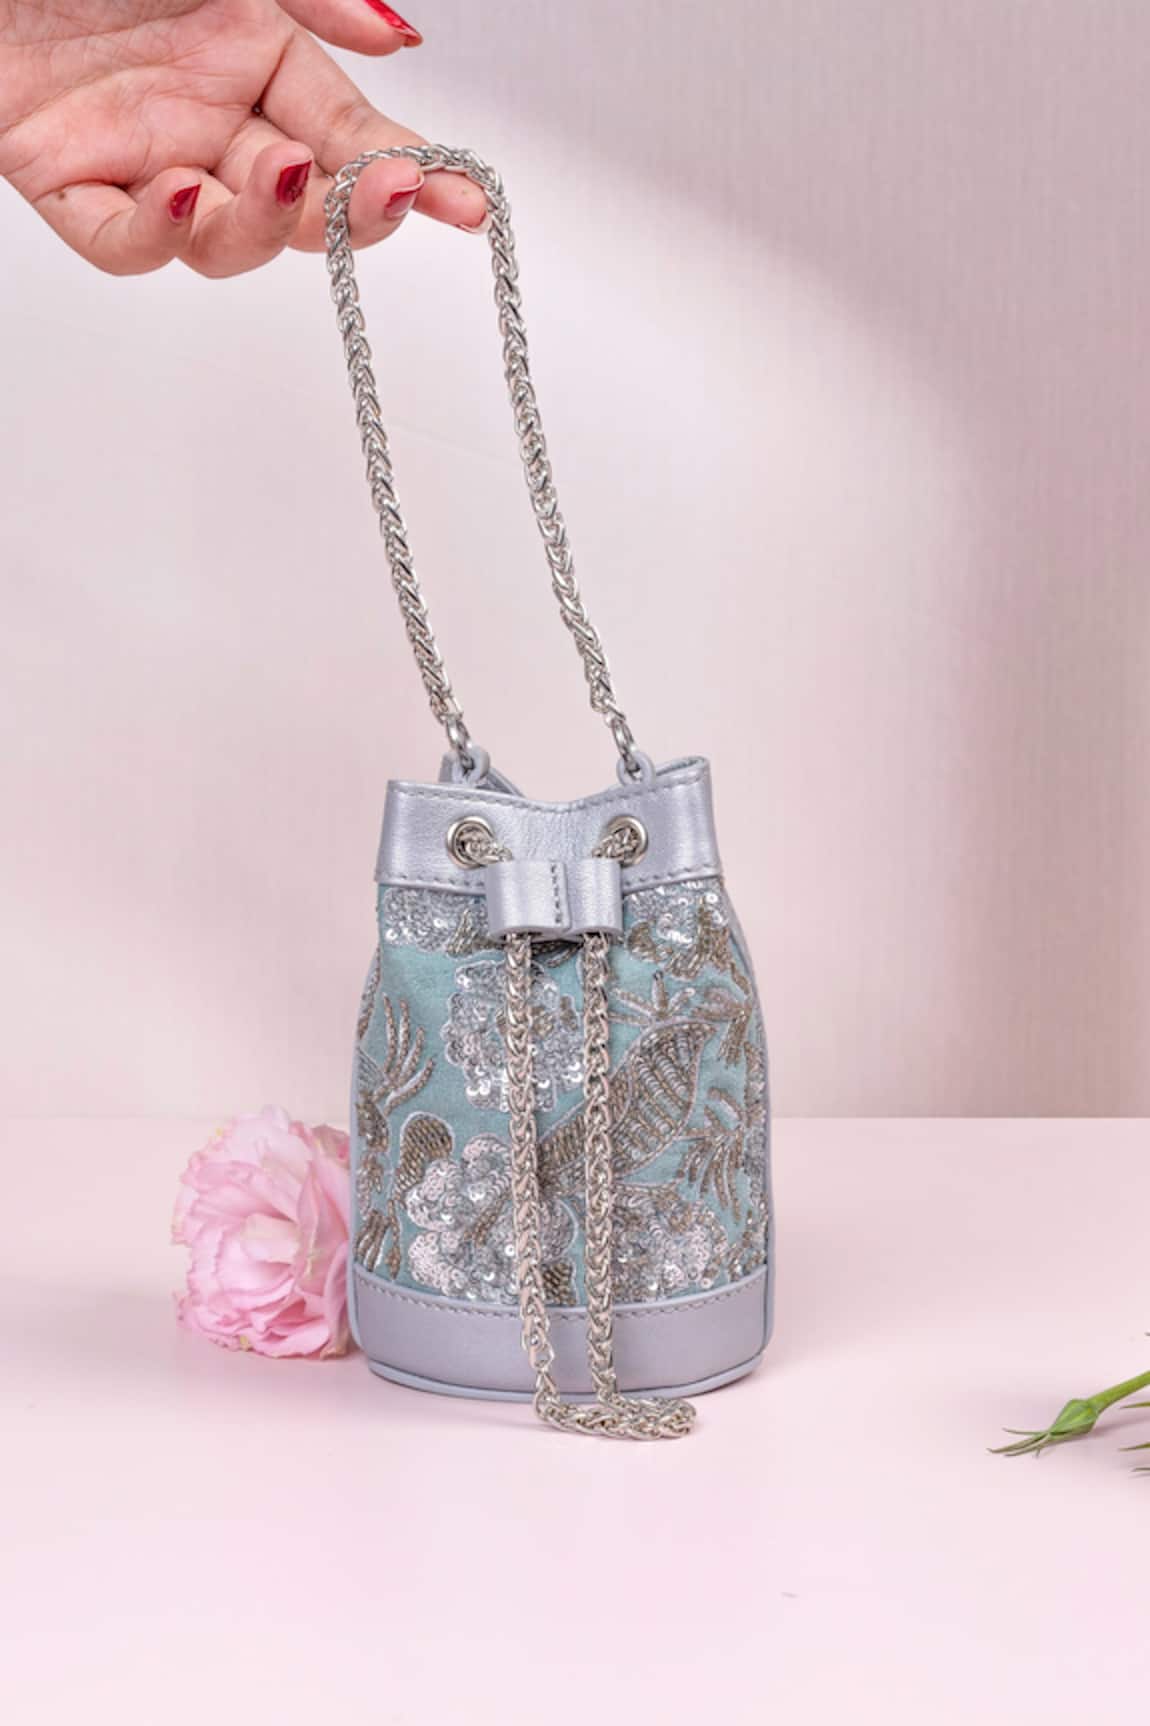 The Leather Garden Leather Embroidered Mini Bucket Bag